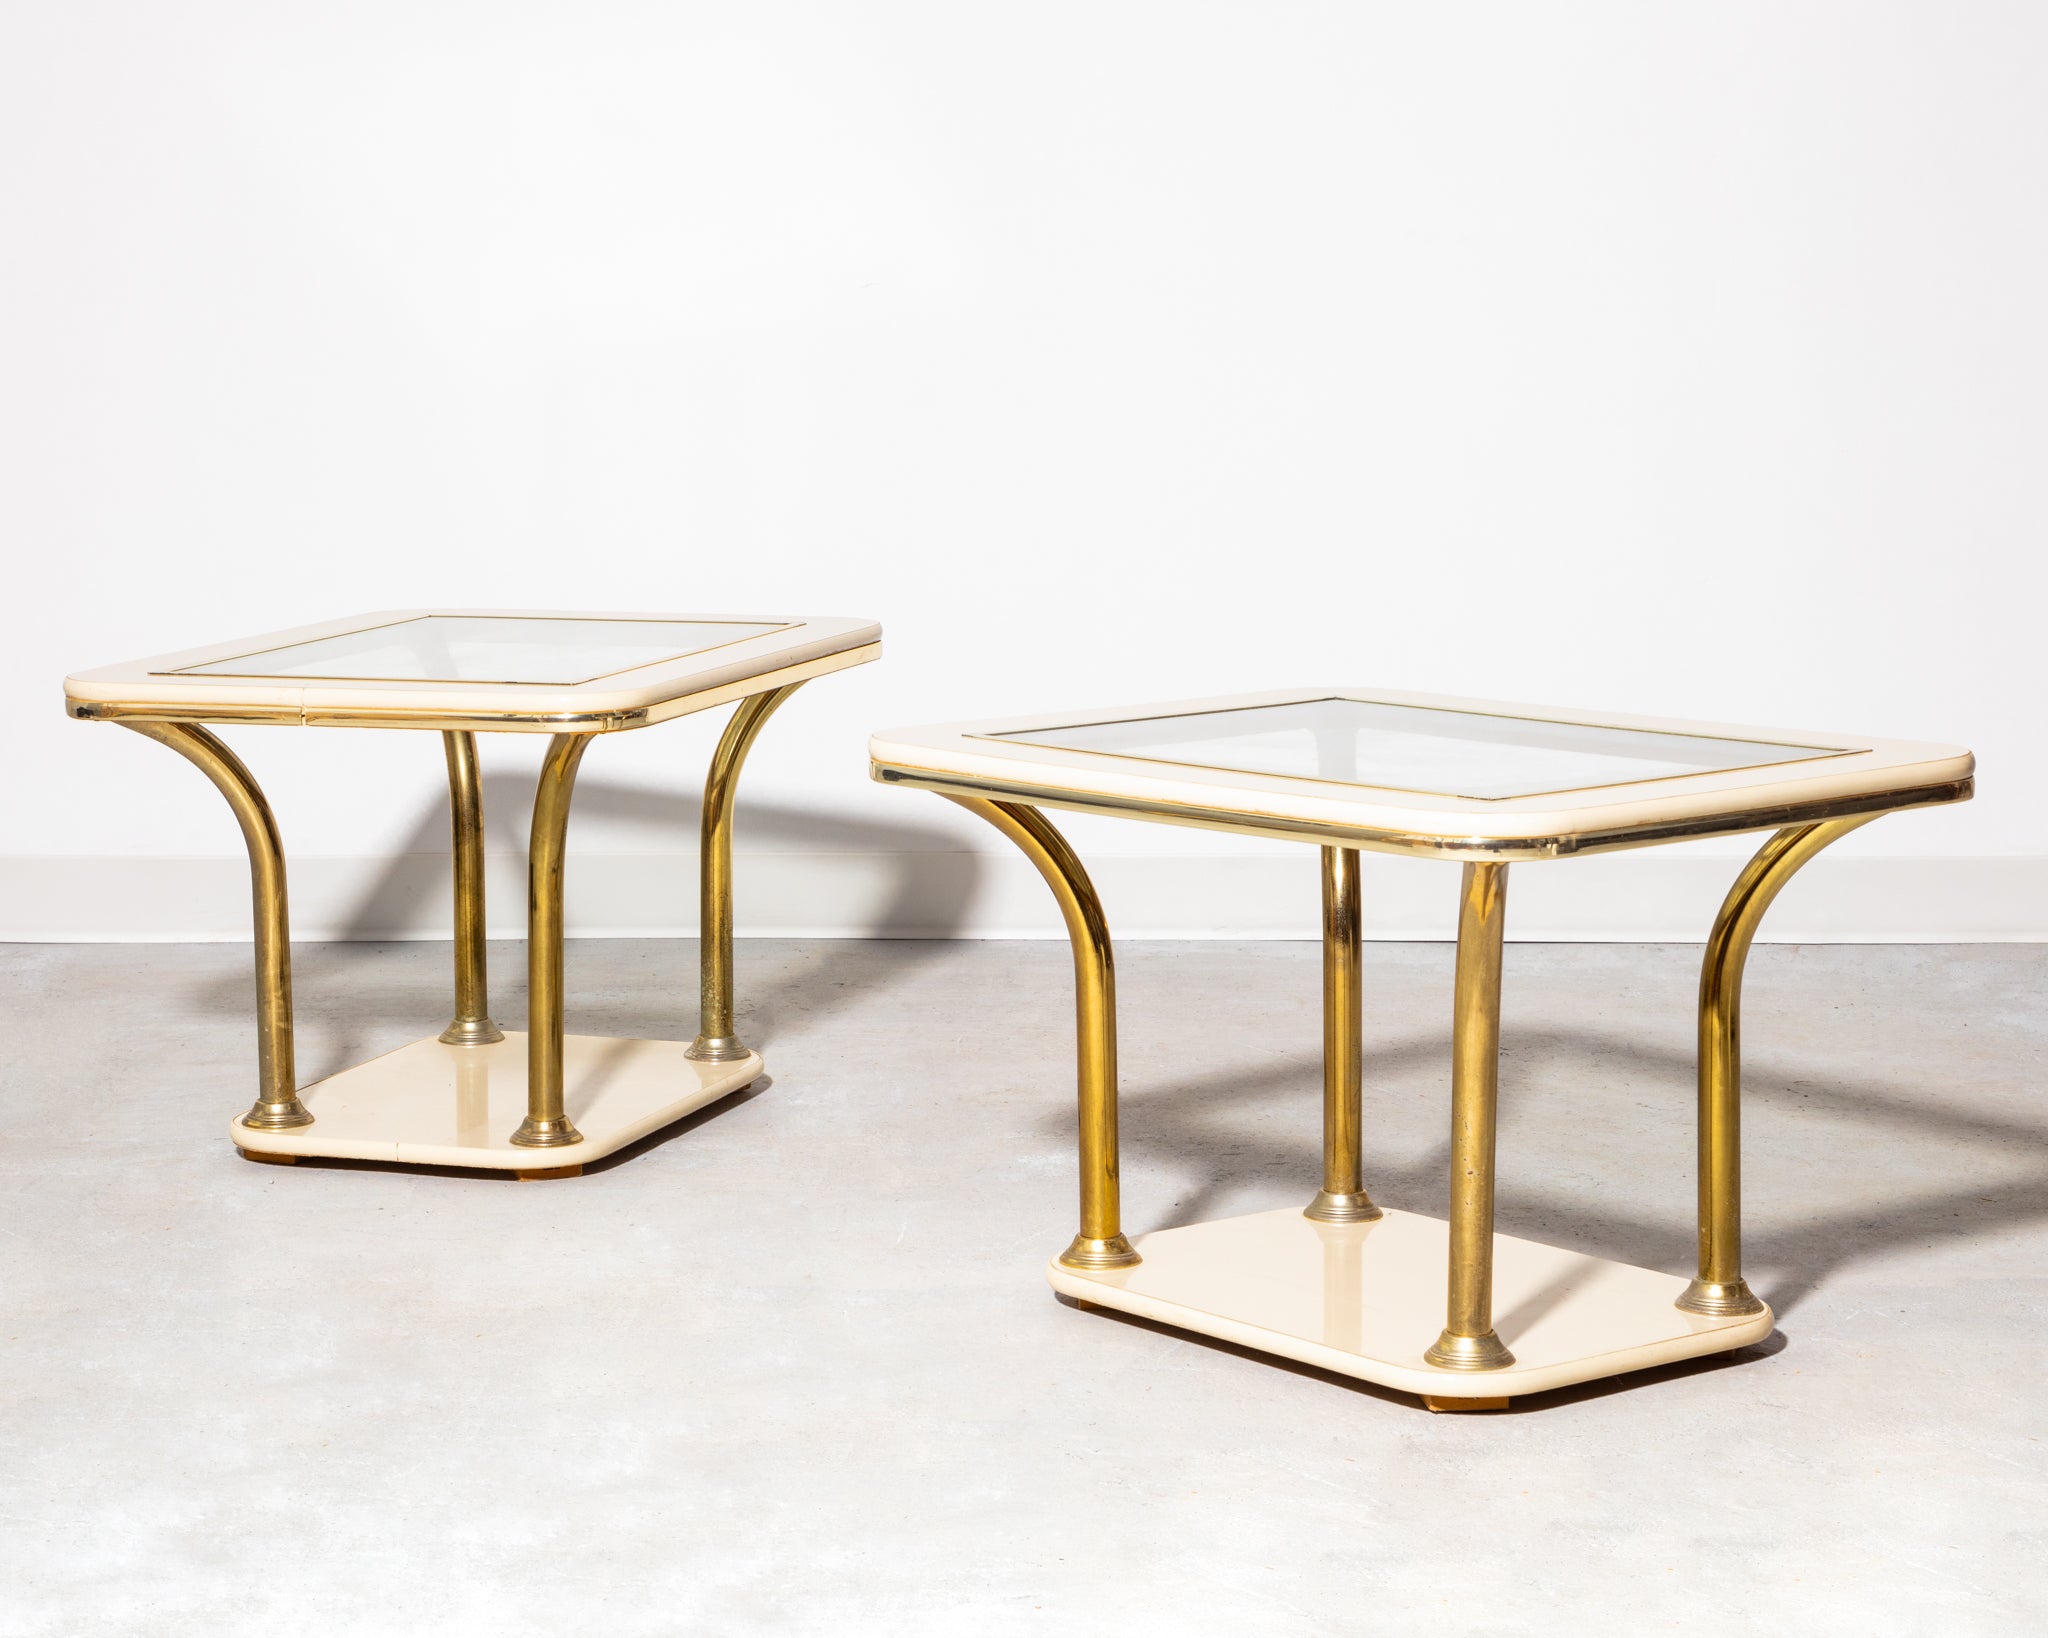 Art deco style pair of lacquer glass side tables